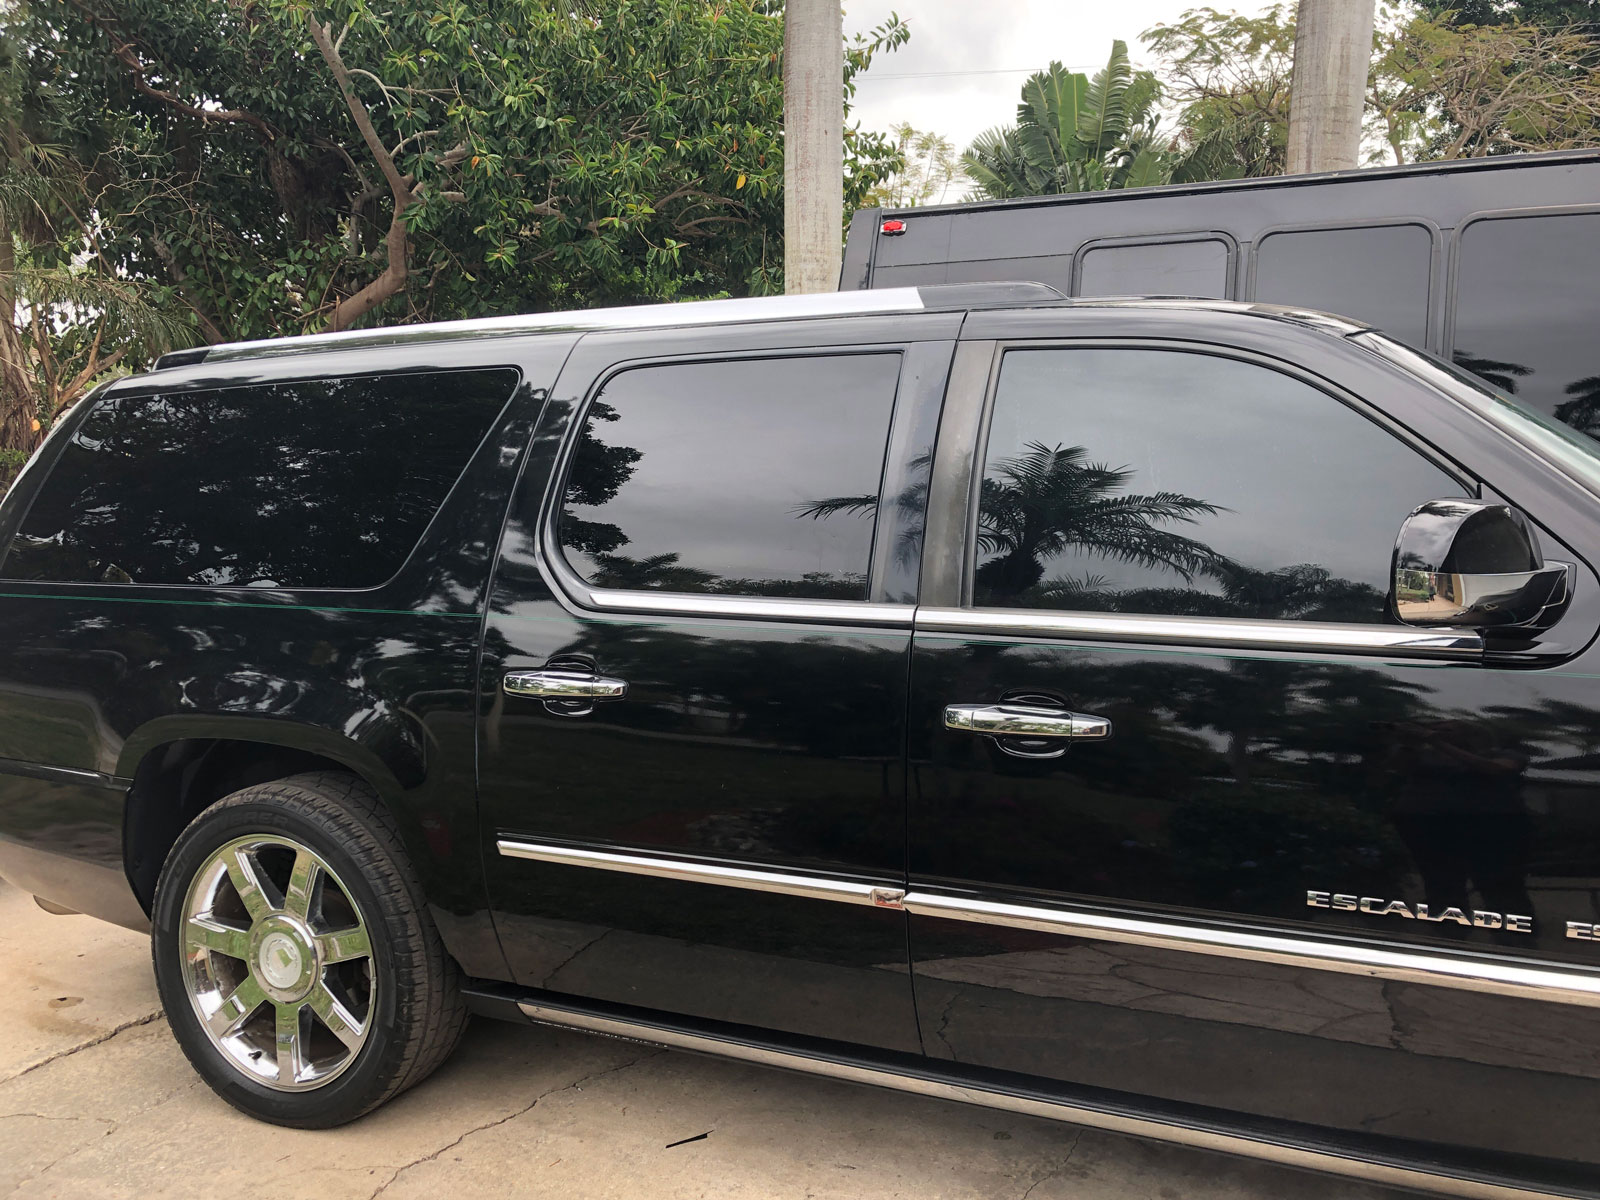 Airport Limo | Personal SUV | Limo Service in Fort Myers FL